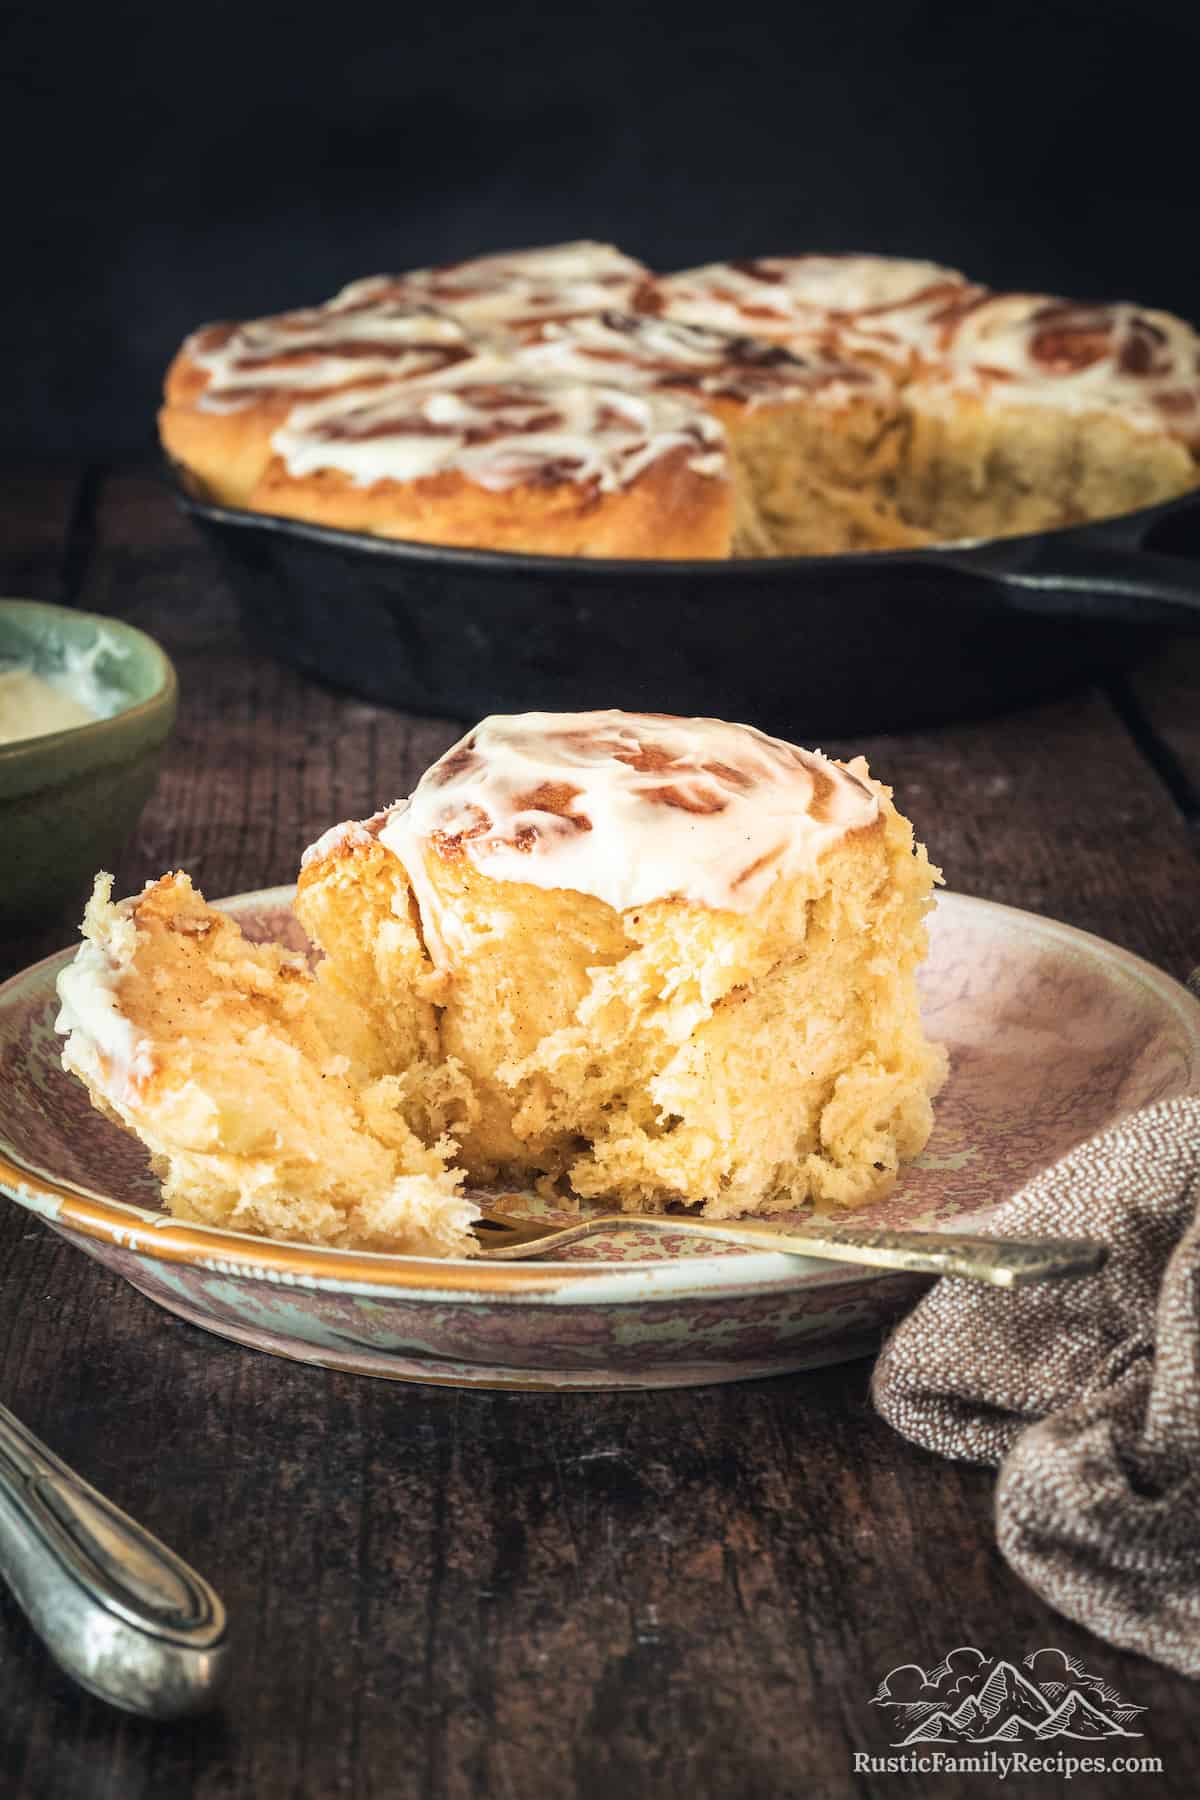 Sourdough Cinnamon Rolls on plate with cast iron skillet in background